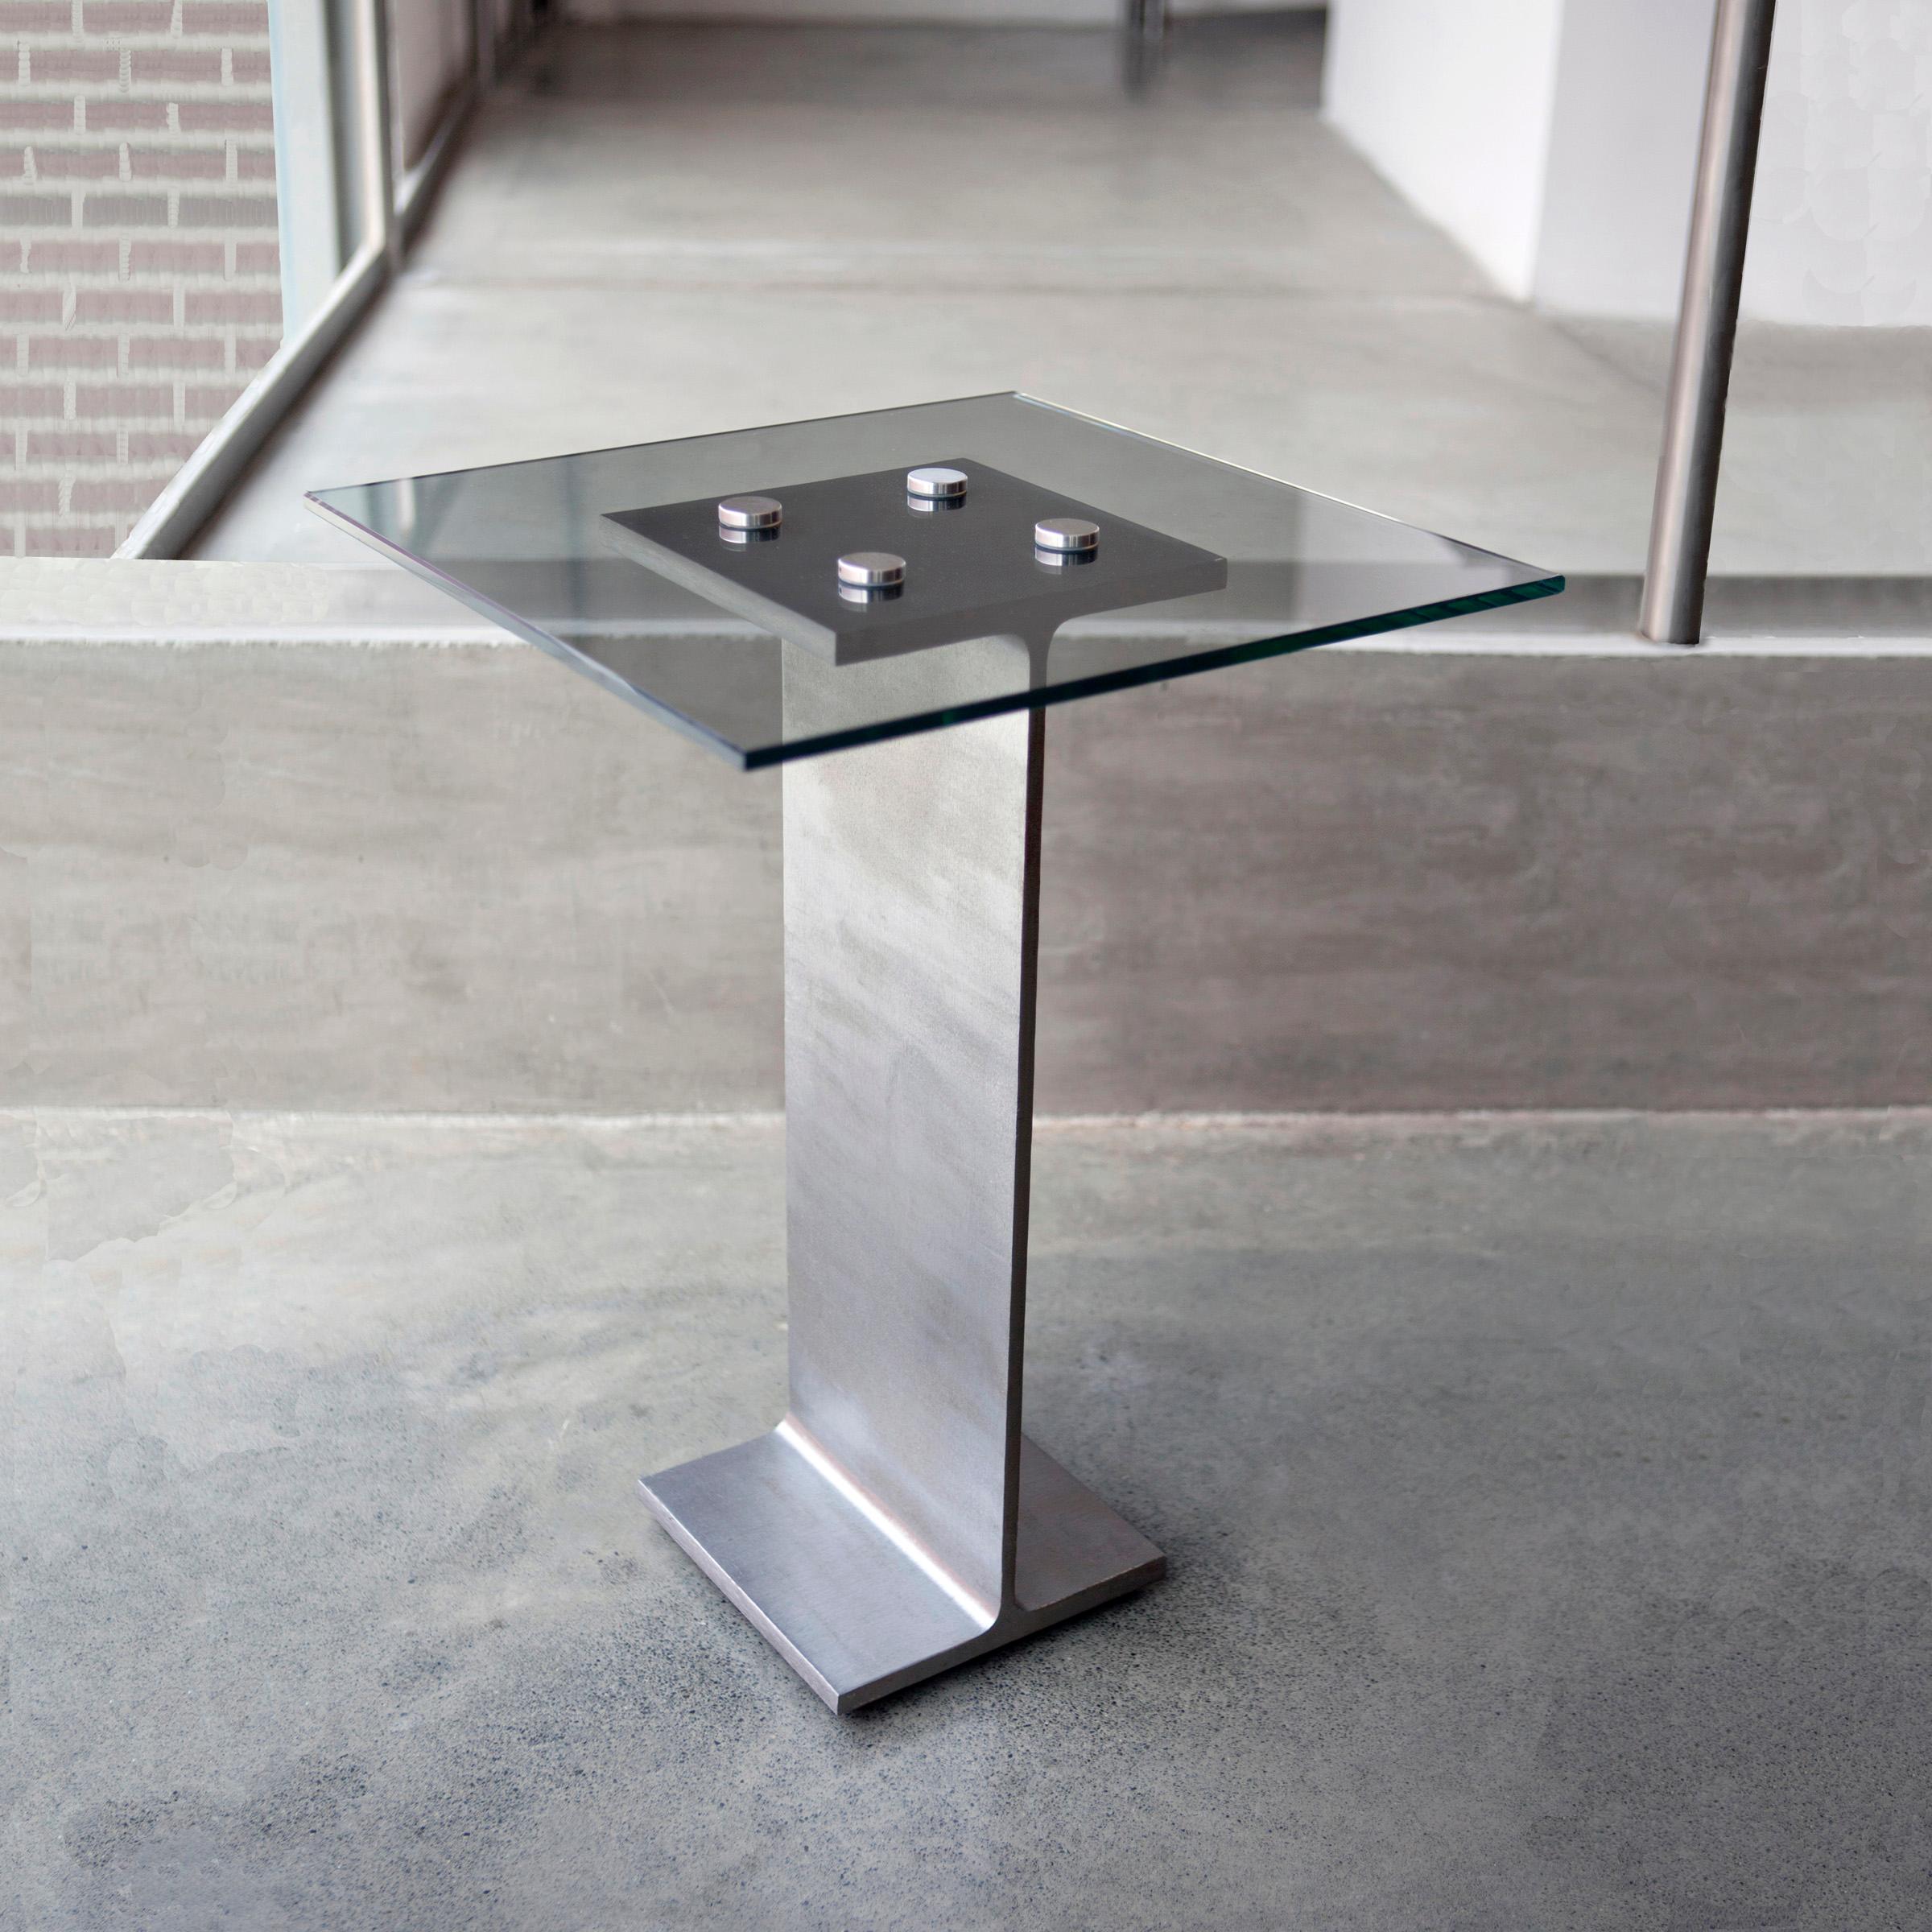 The Mid-Rise Side Table 

Command a sleek and refined level of minimalism, elegance, and proportion in your designer home or hotel lobby with this sophisticated side table or use as a modern nightstand lamp table next to your modernist bed.  The